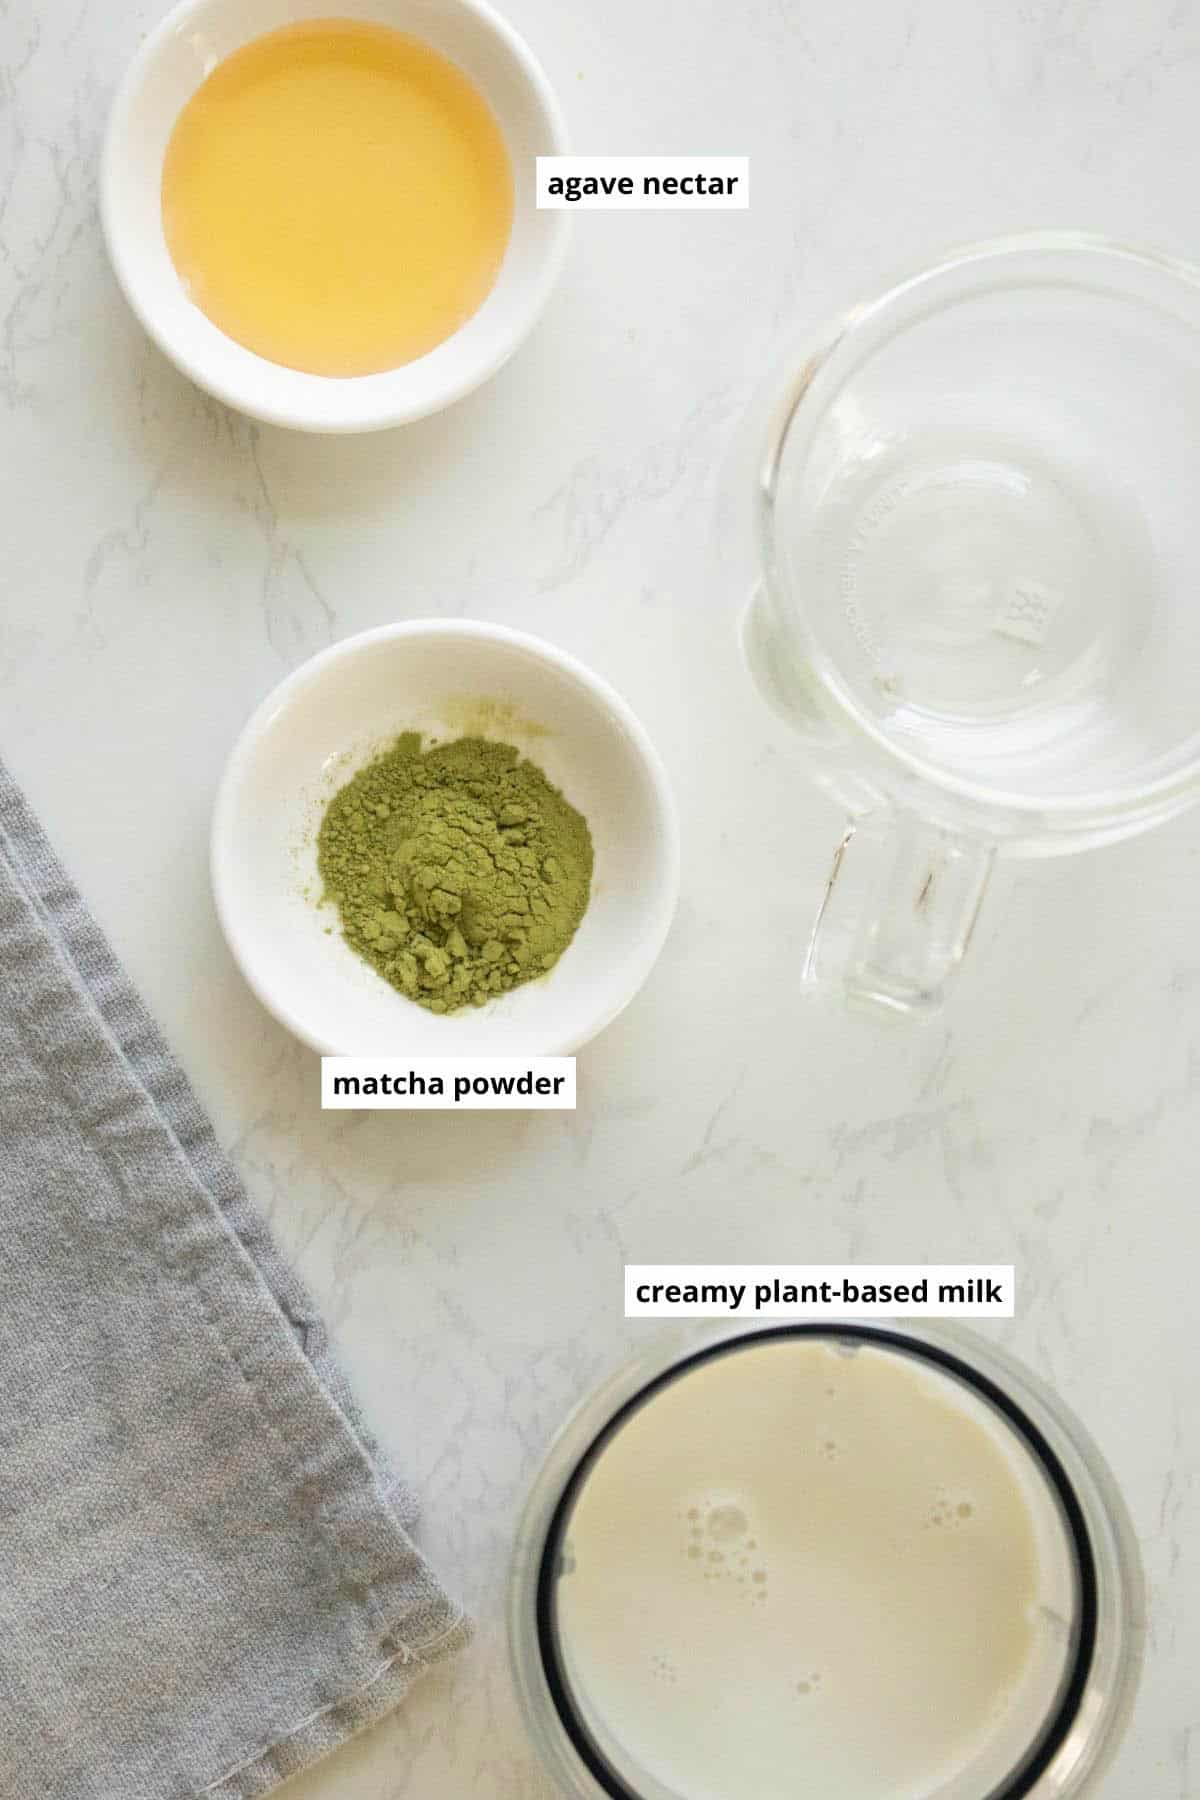 matcha powder, vegan milk, and agave nectar in cups on a white table